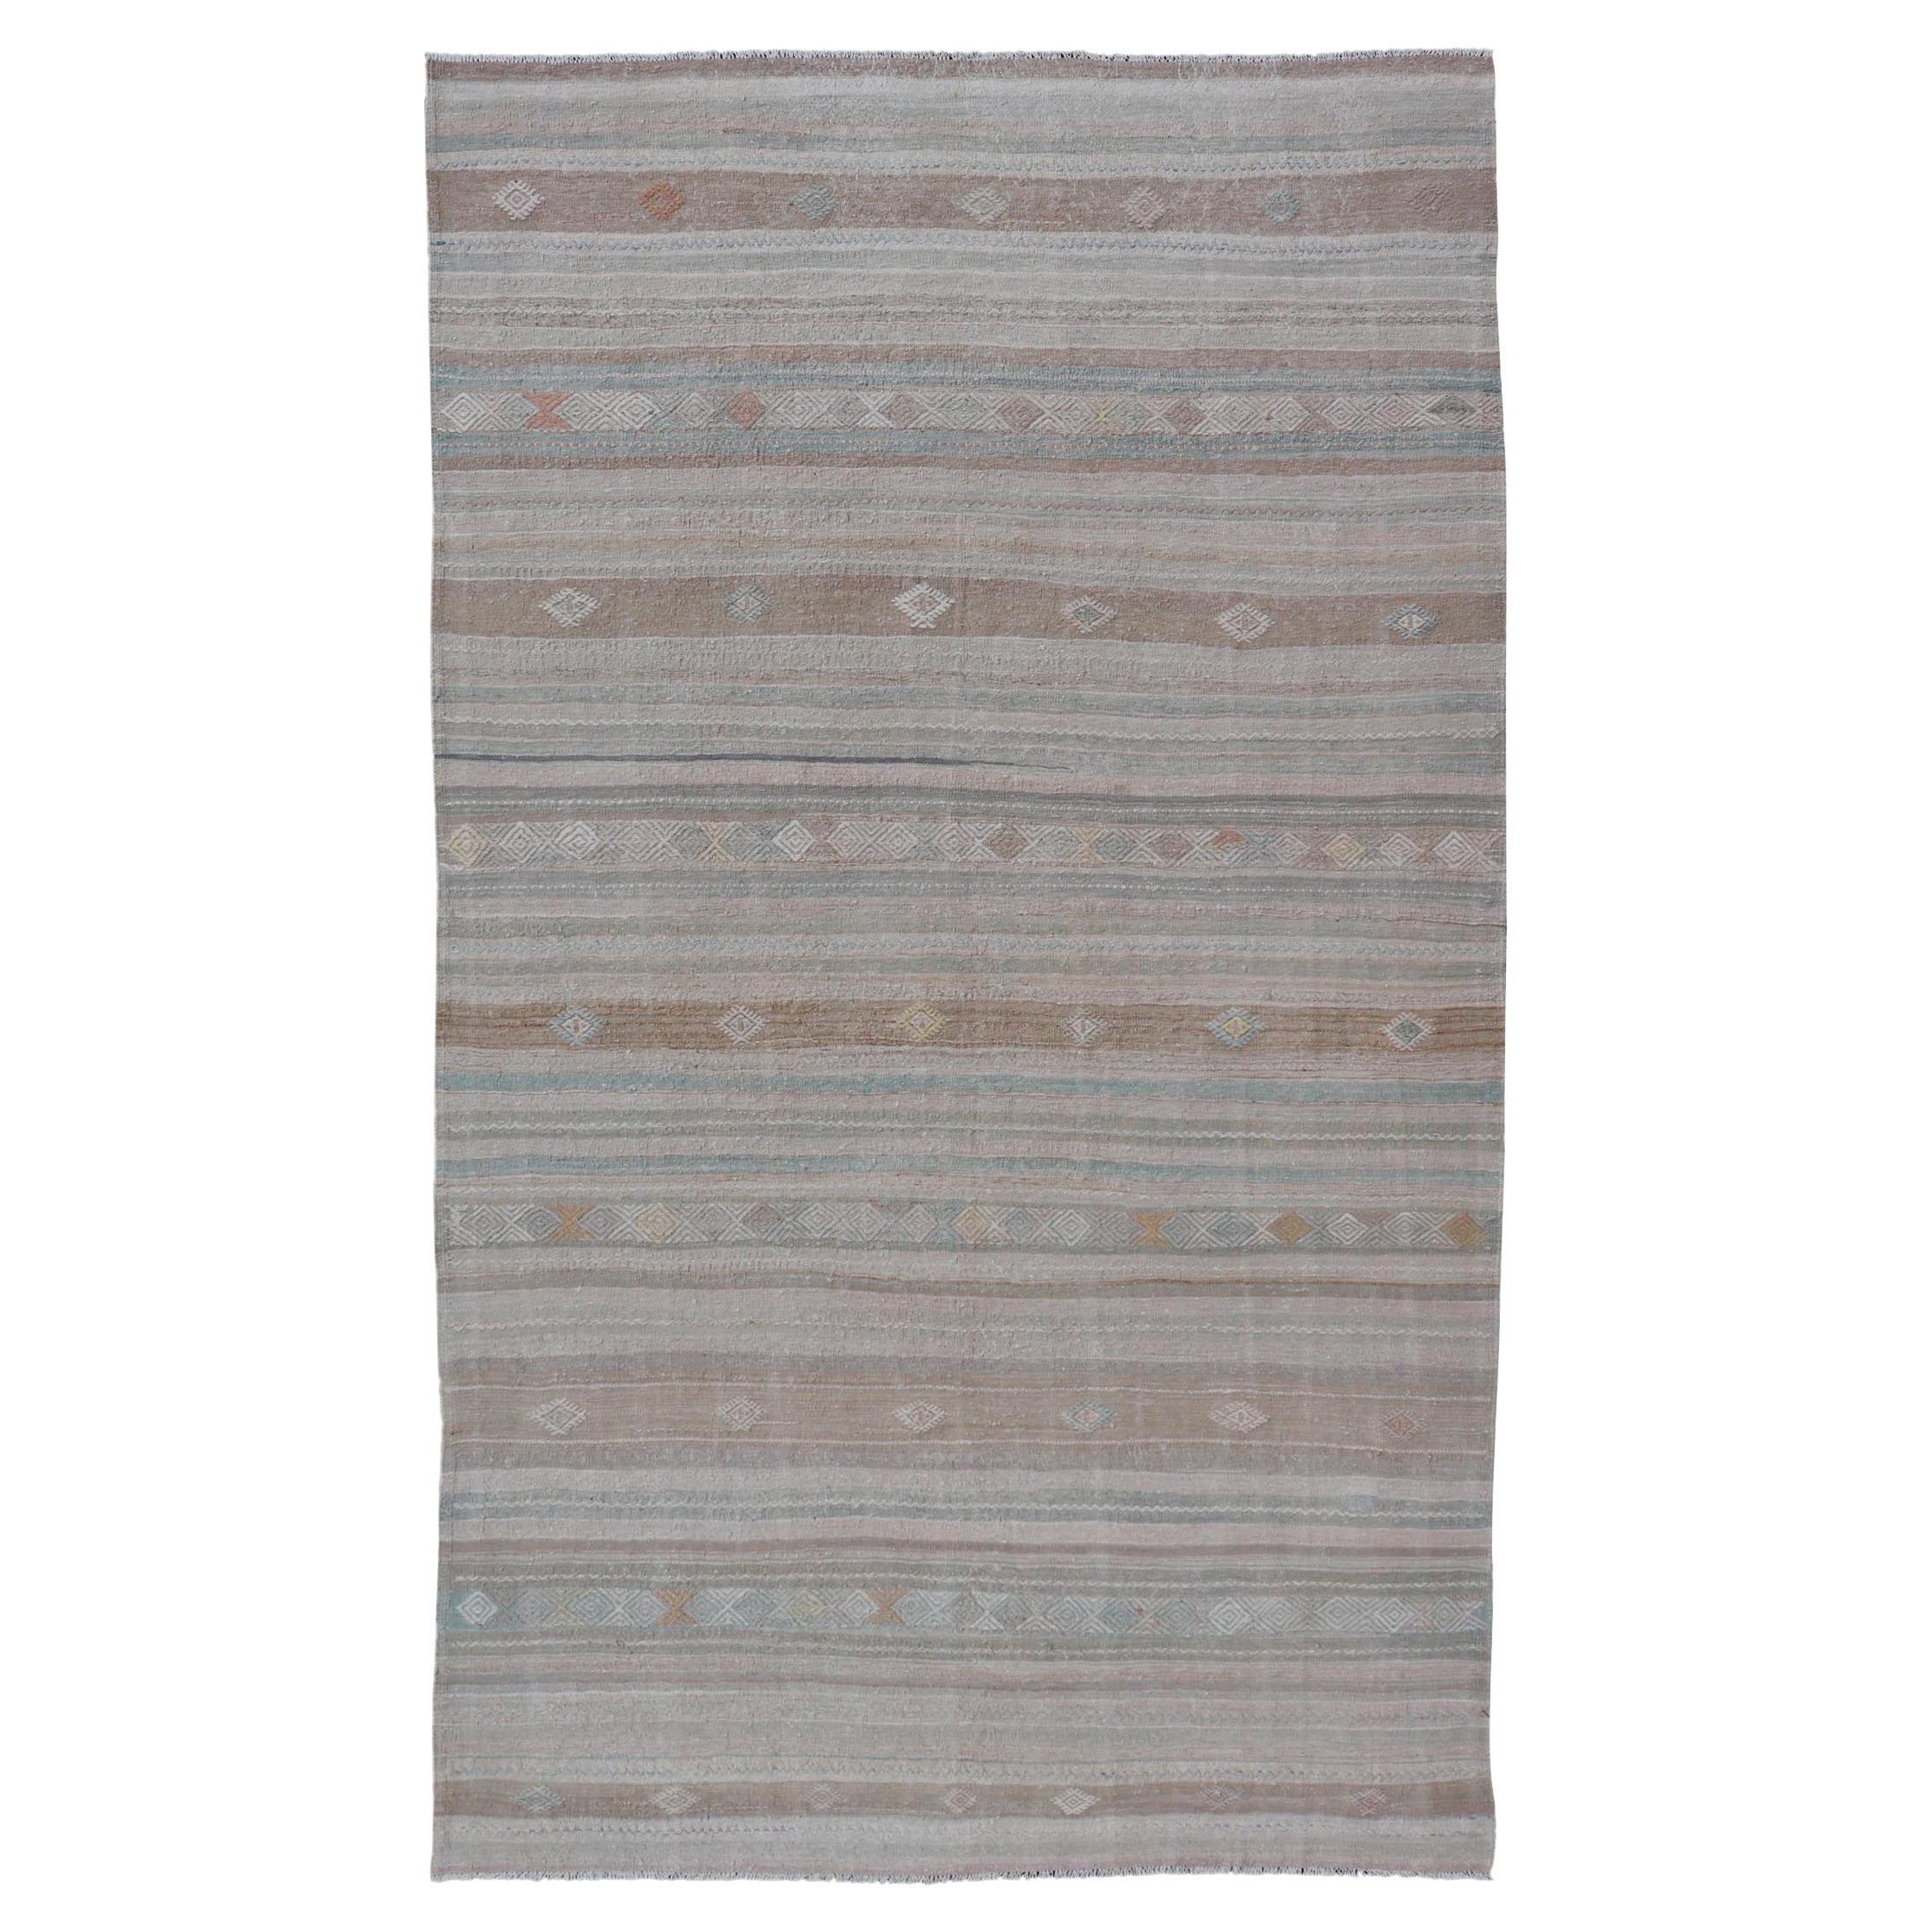 Turkish Flat-Weave Kilim with Embroideries in Taupe, Tan, Light Green, and Grey